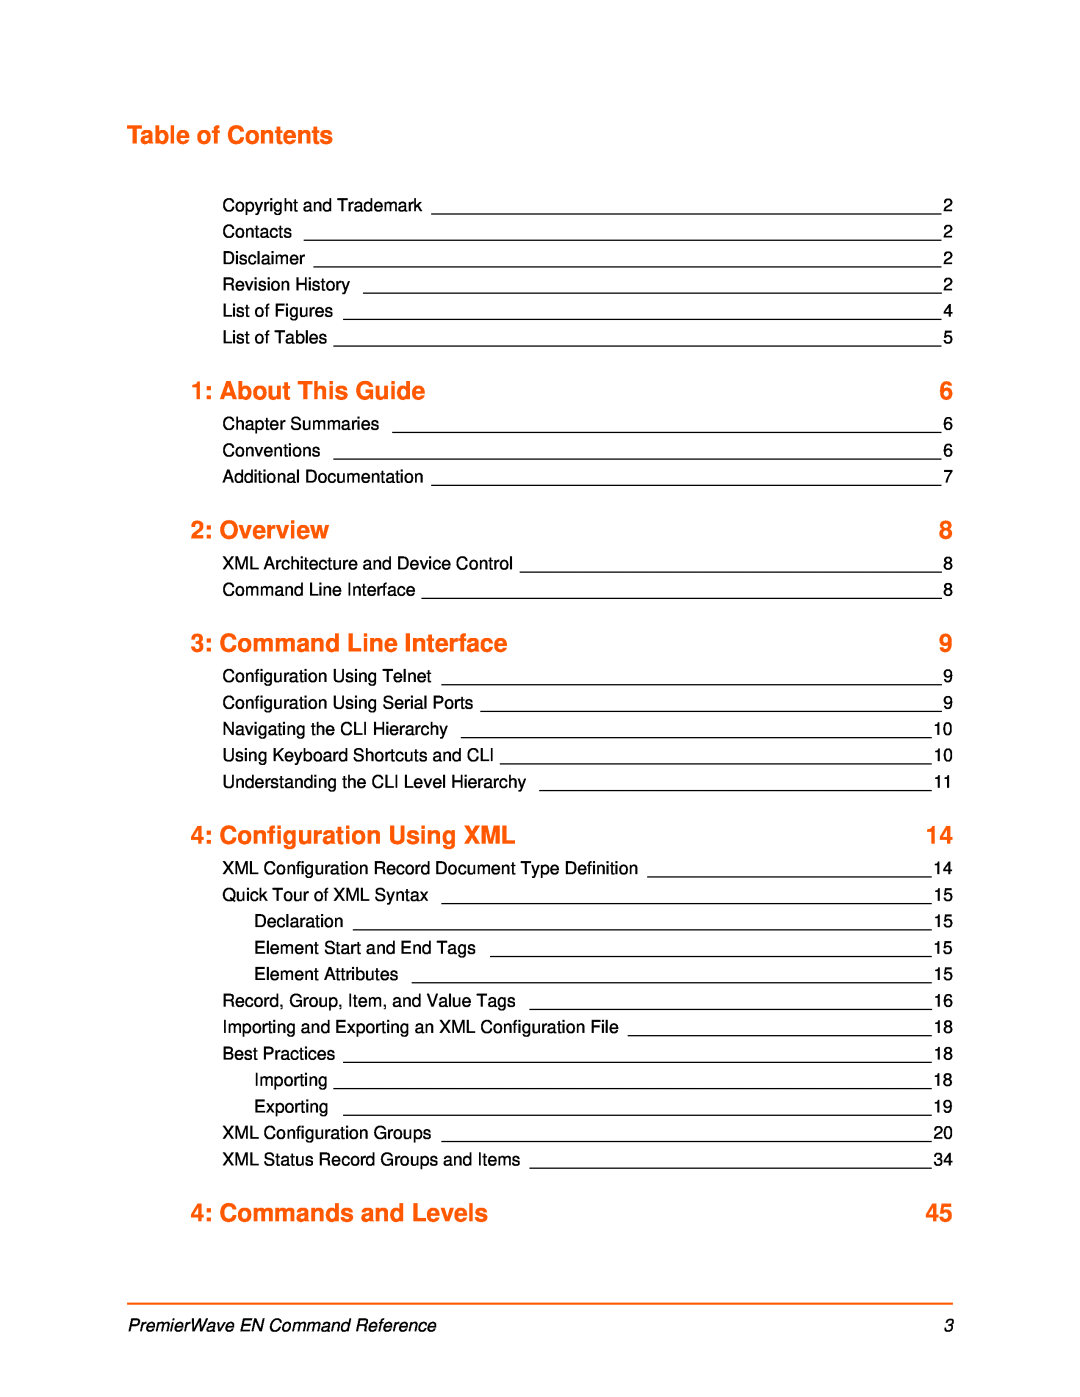 Lantronix 900-581 manual Table of Contents, About This Guide, Overview, Command Line Interface, Configuration Using XML 